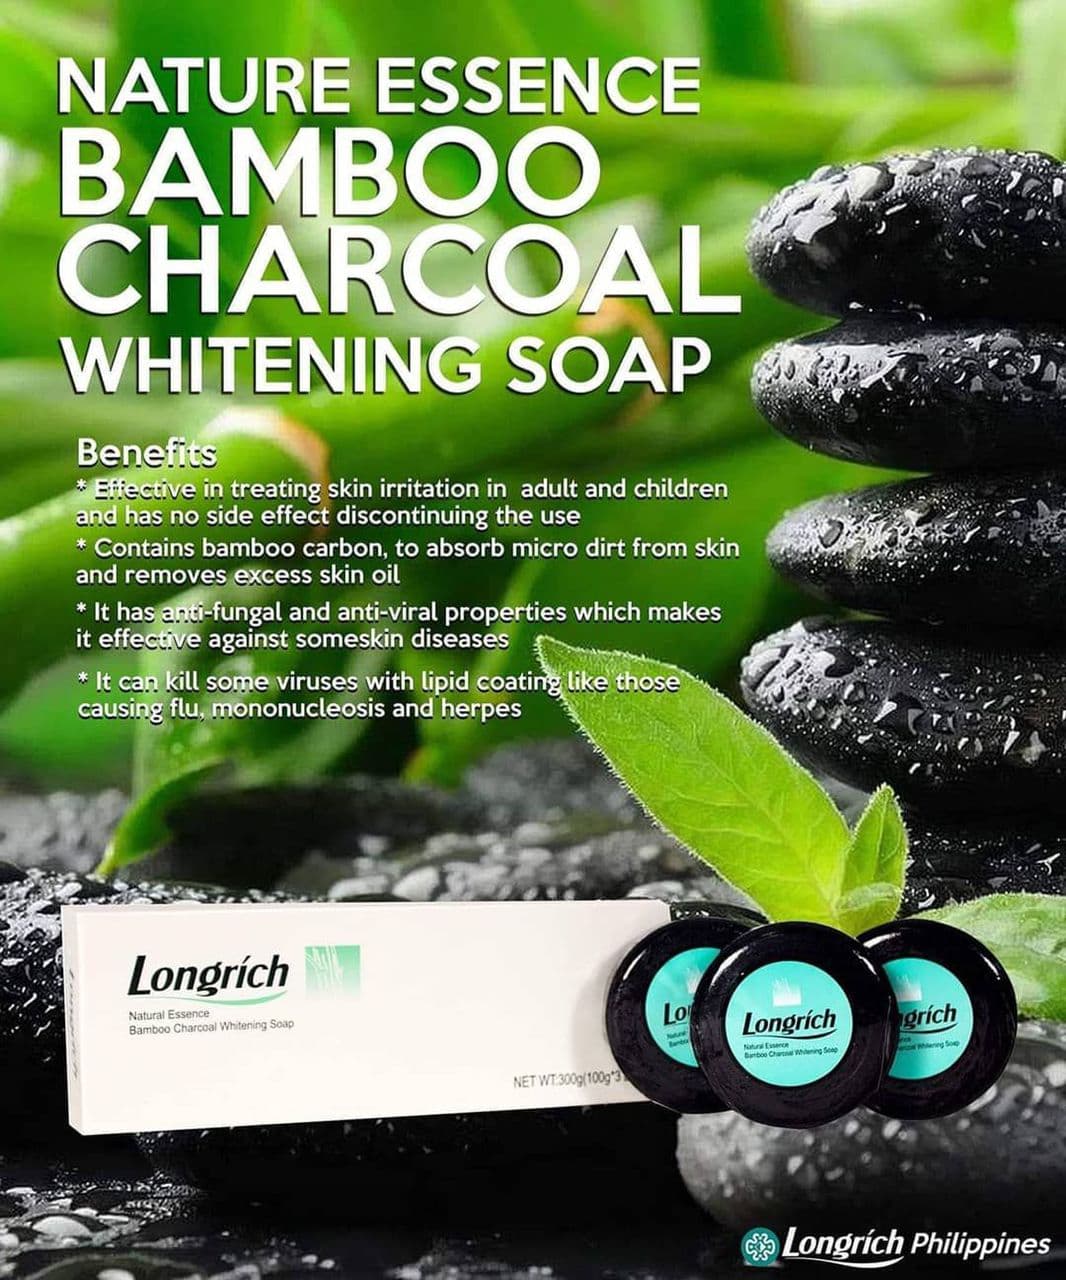 Longrich essence bamboo charcoal whitening soap